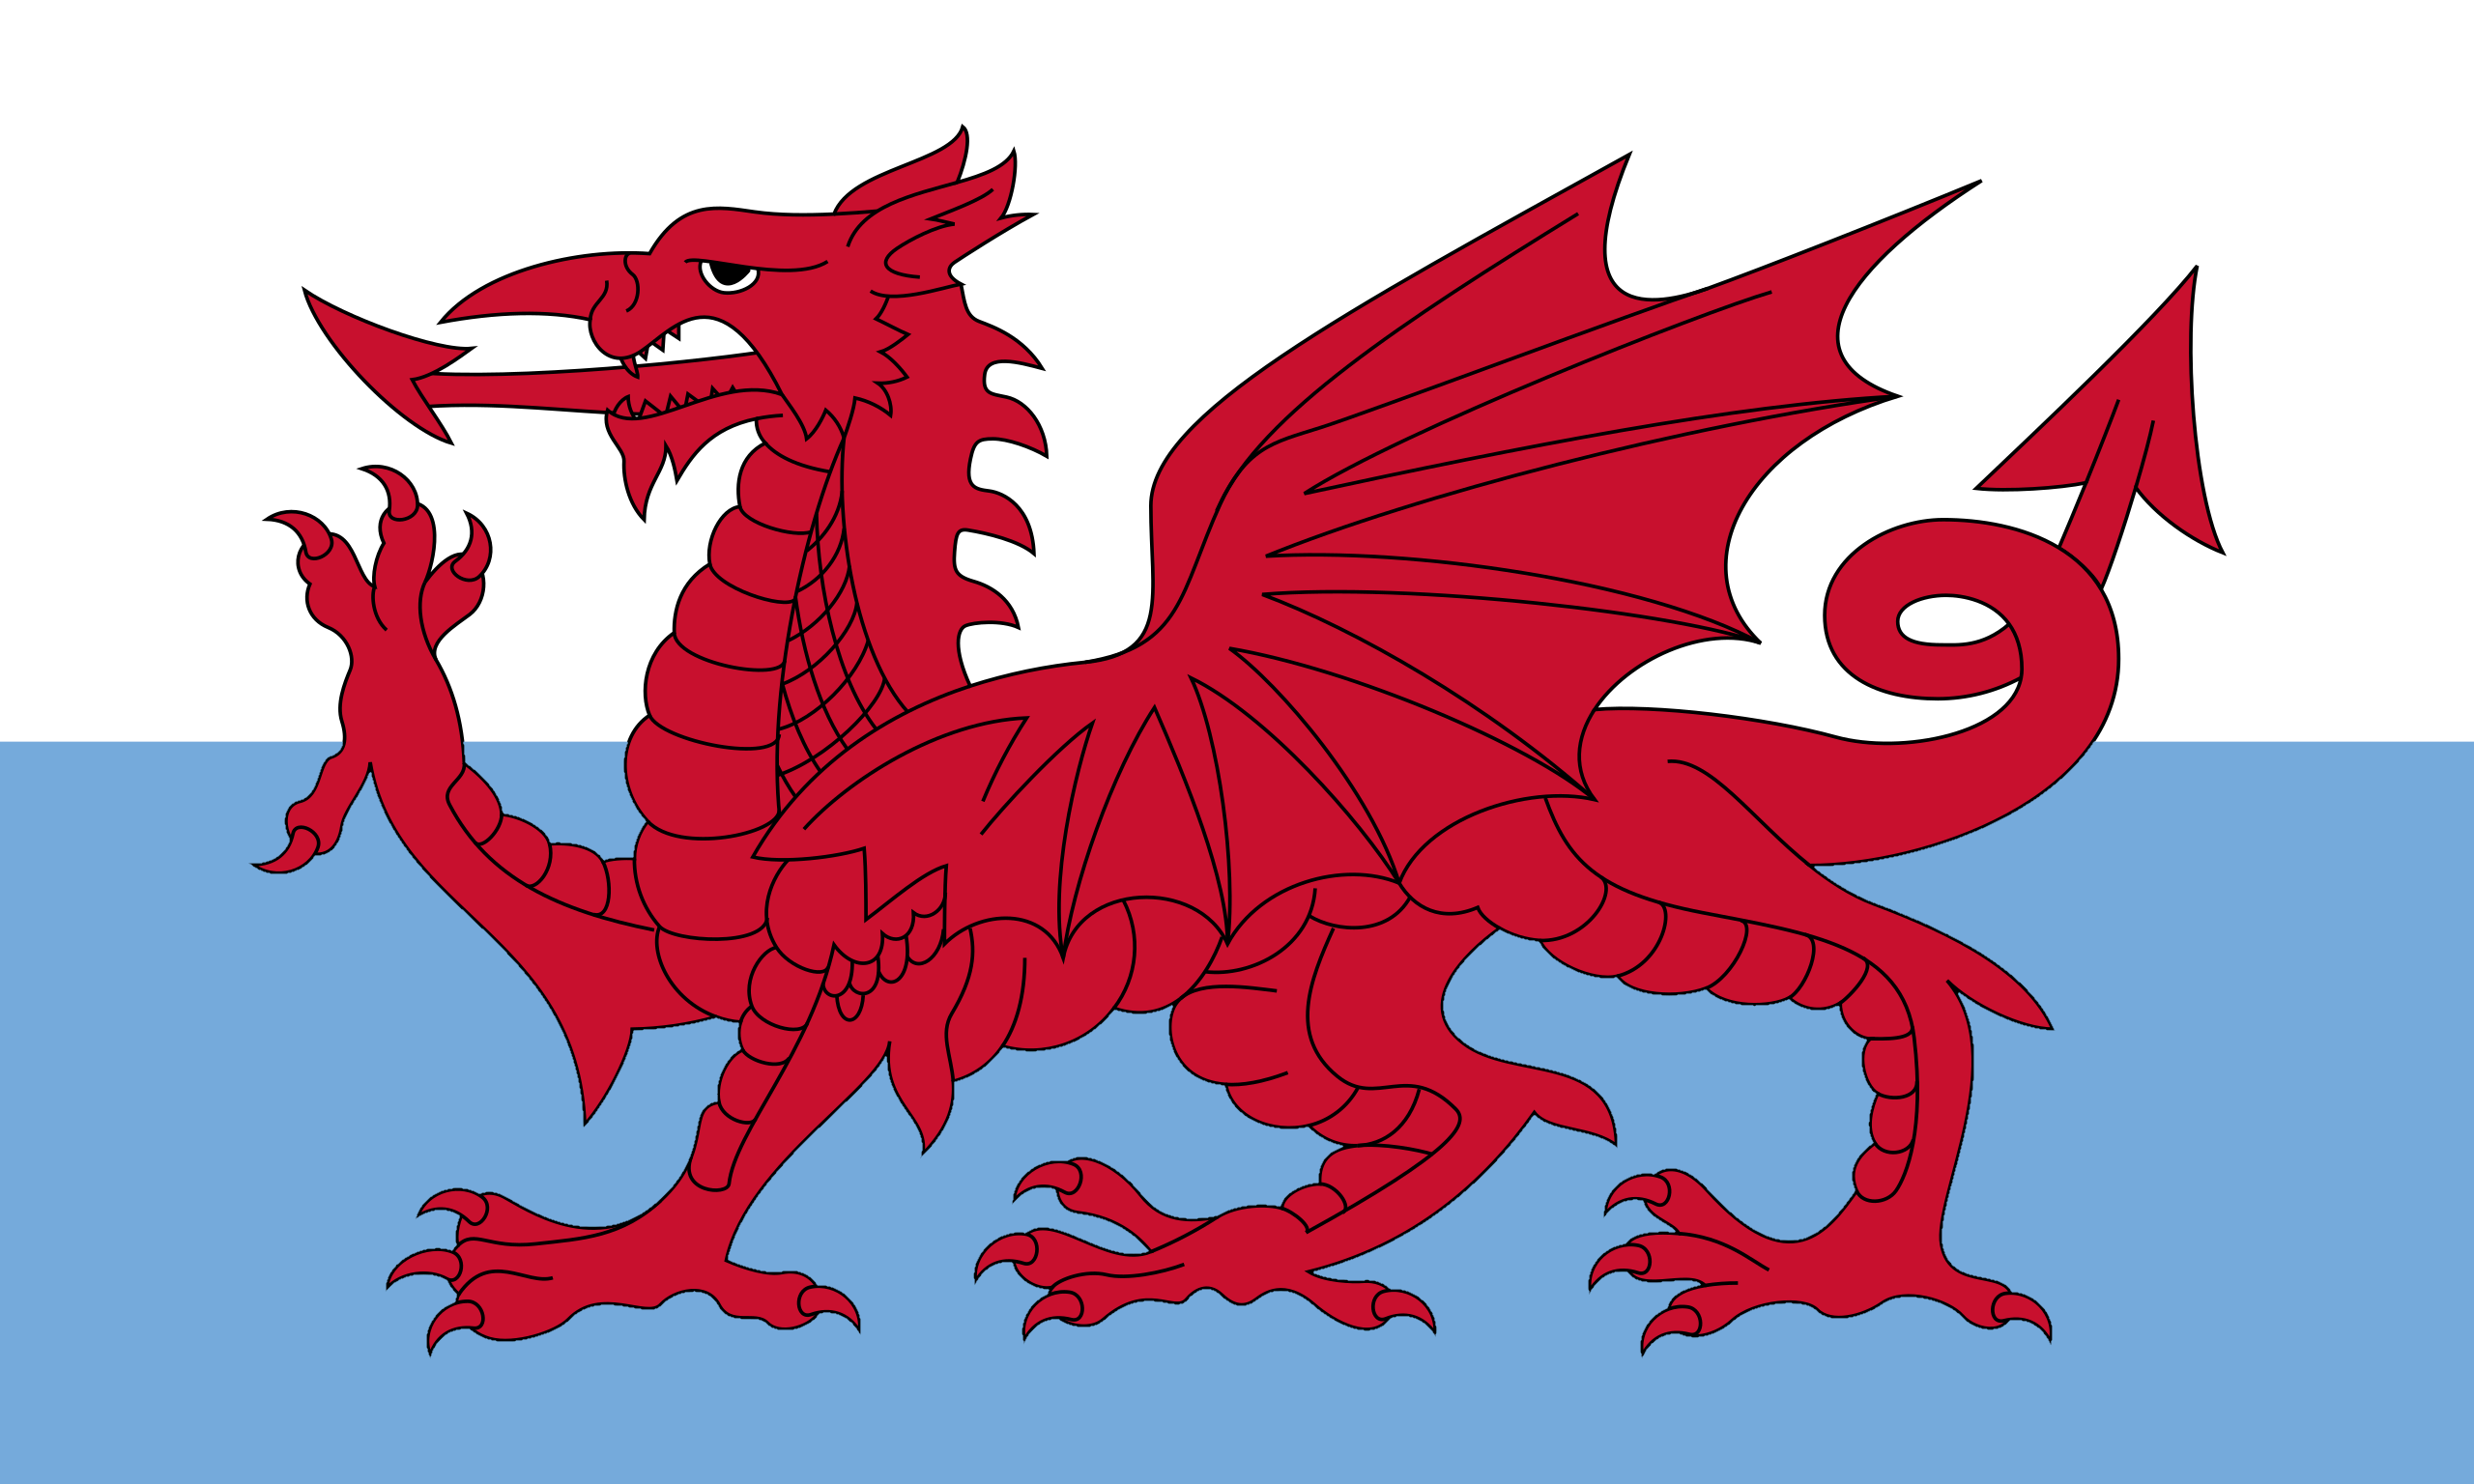 Flag_of_New_Wales.svg.png